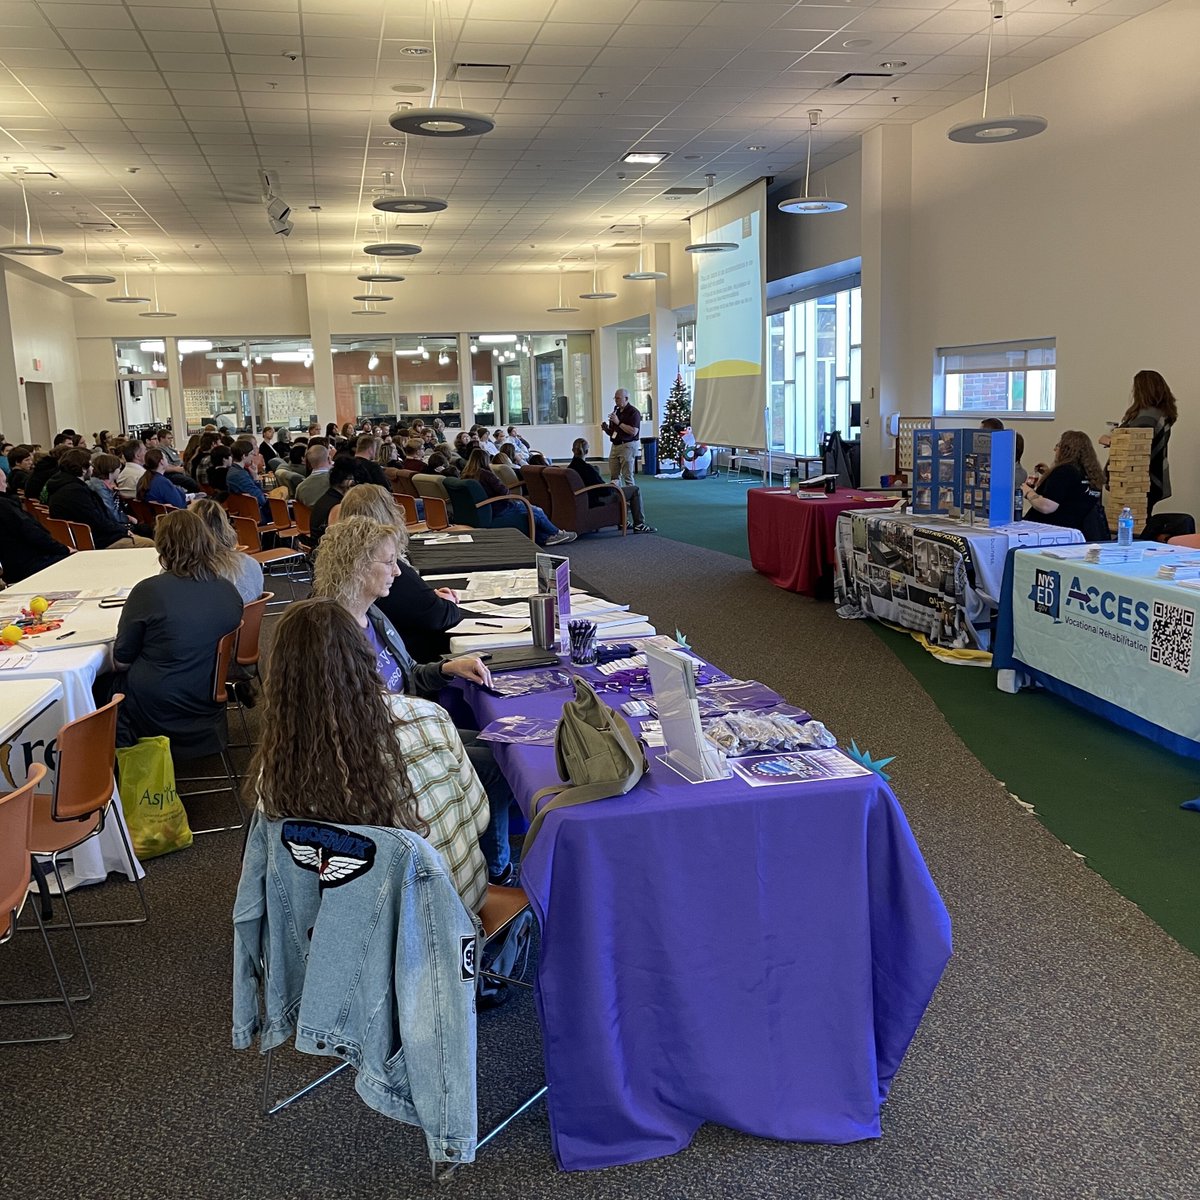 Today, Chautauqua County high school students attended a Transitions Workforce Fair at #SUNYJCC. Reps from Goodskills, E2CCB, Acces VR, Bush Furniture, Chautauqua Works, Aspire, Person Centered Services, Elwood Staffing, Artone, Marco, and Blackstone attended.